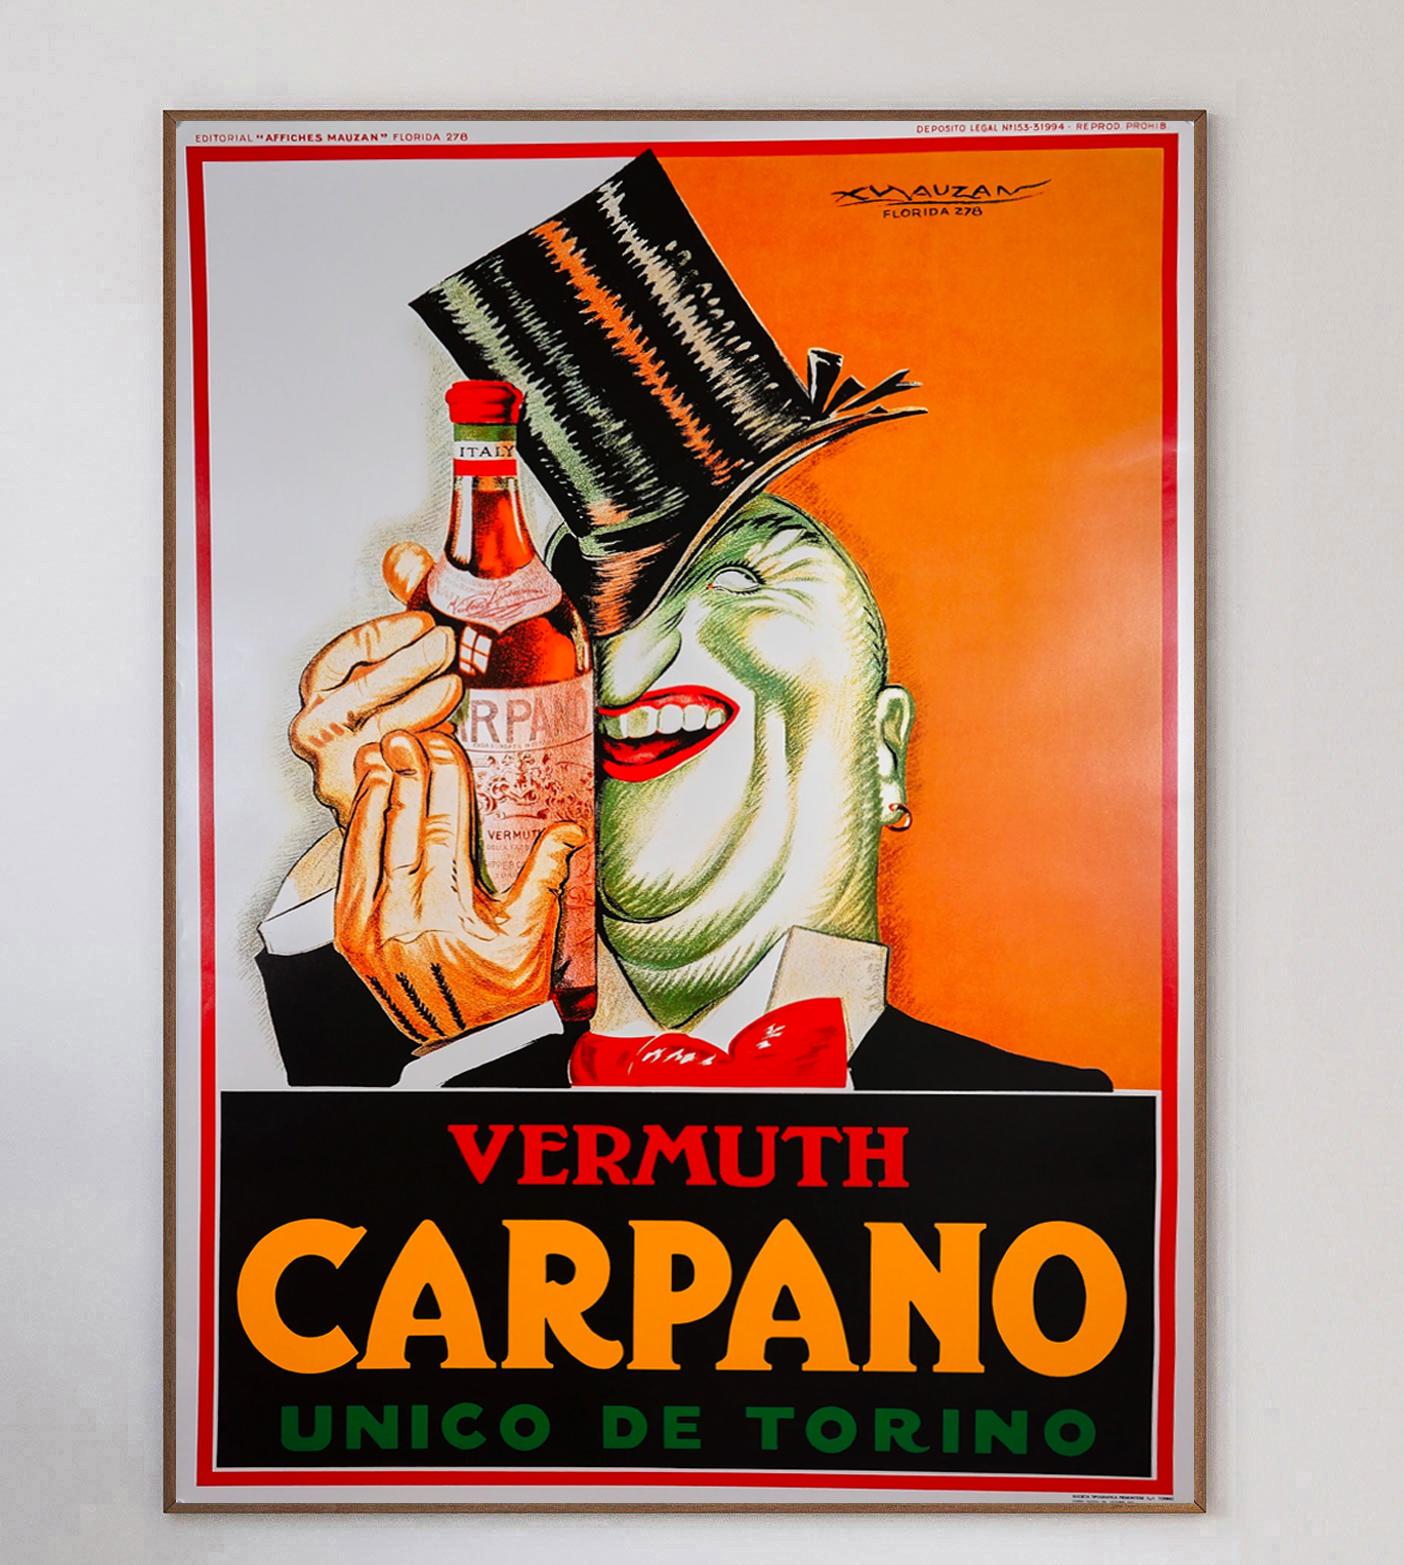 Carpano is named after Antonio Benedetto Carpano who, in 1786, invented the modern day vermouth in Turin. This Carpano vermouth was so popular that the store needed to be open 24 hours a day to cope with demand. The Carpano brand is still produced